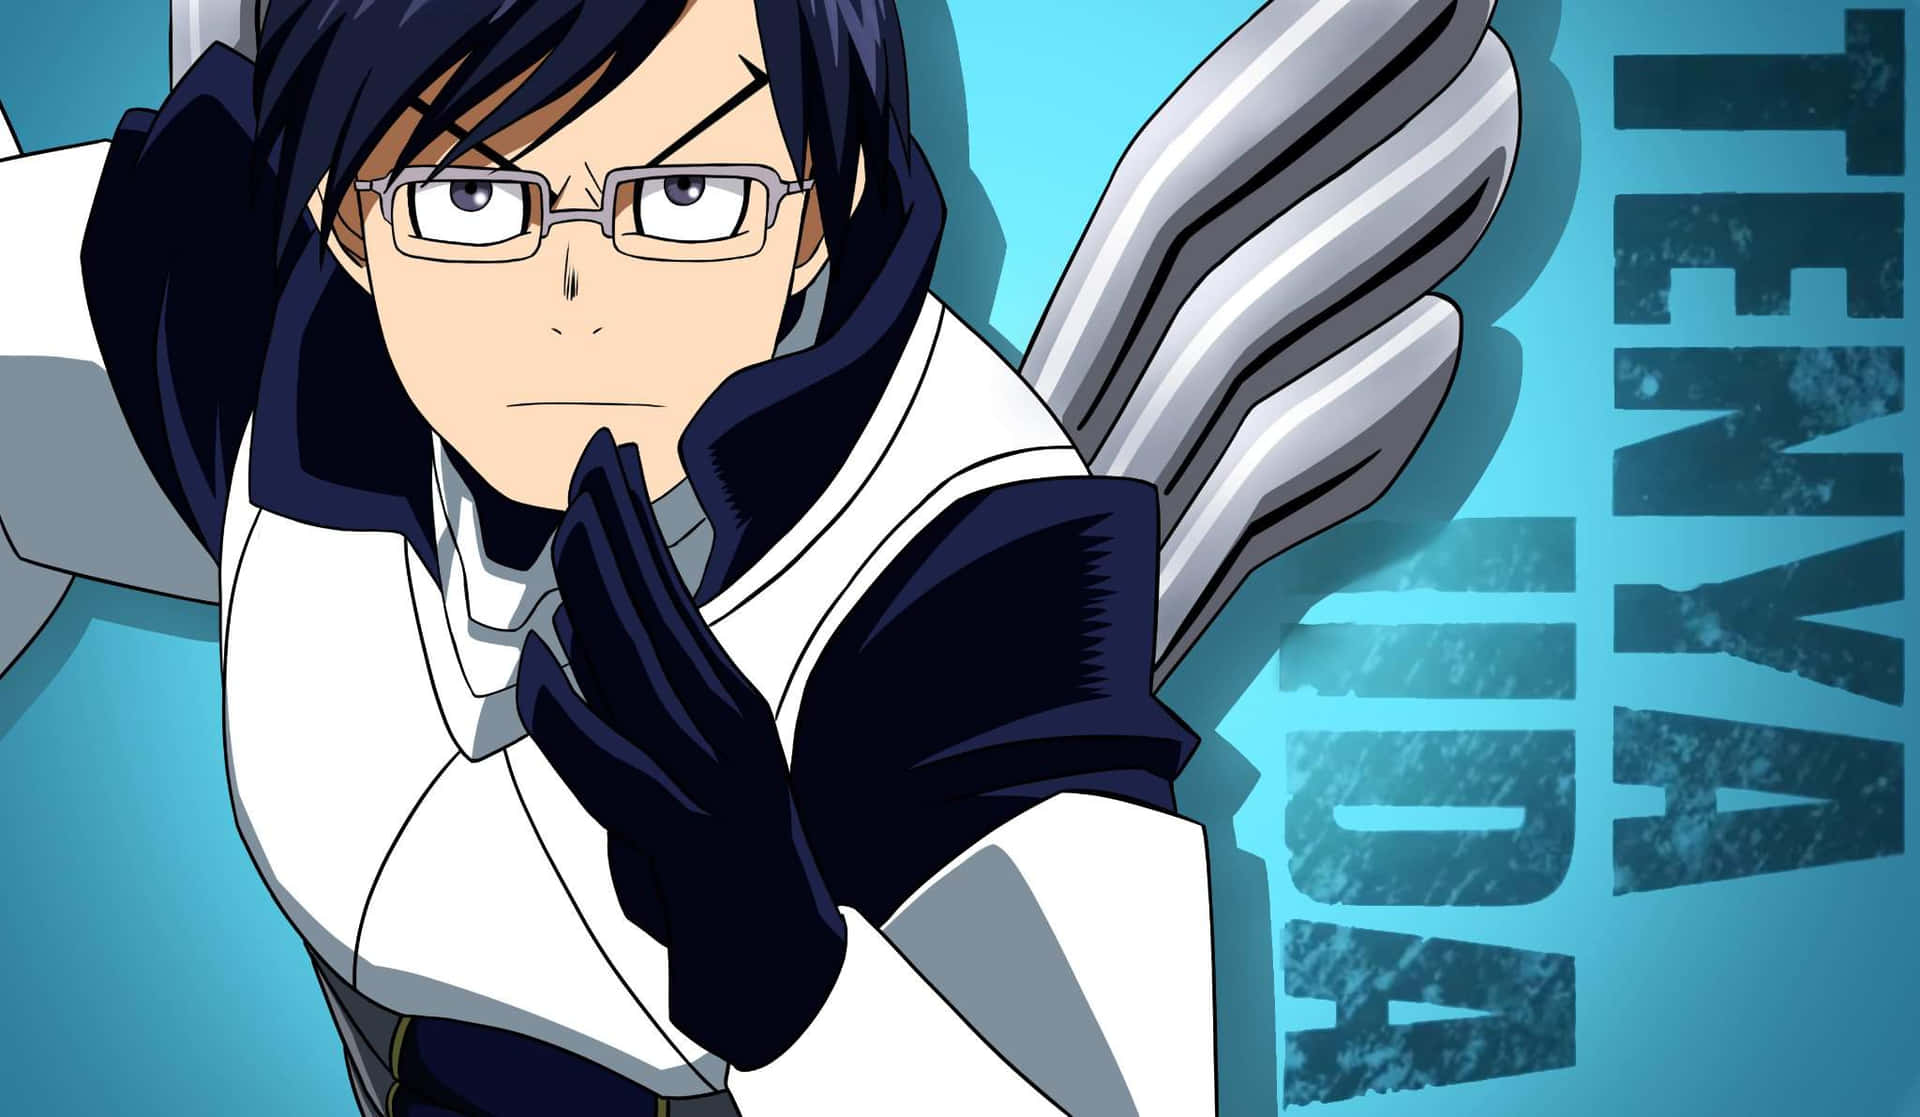 Tenya Iida standing confidently and ready for action Wallpaper